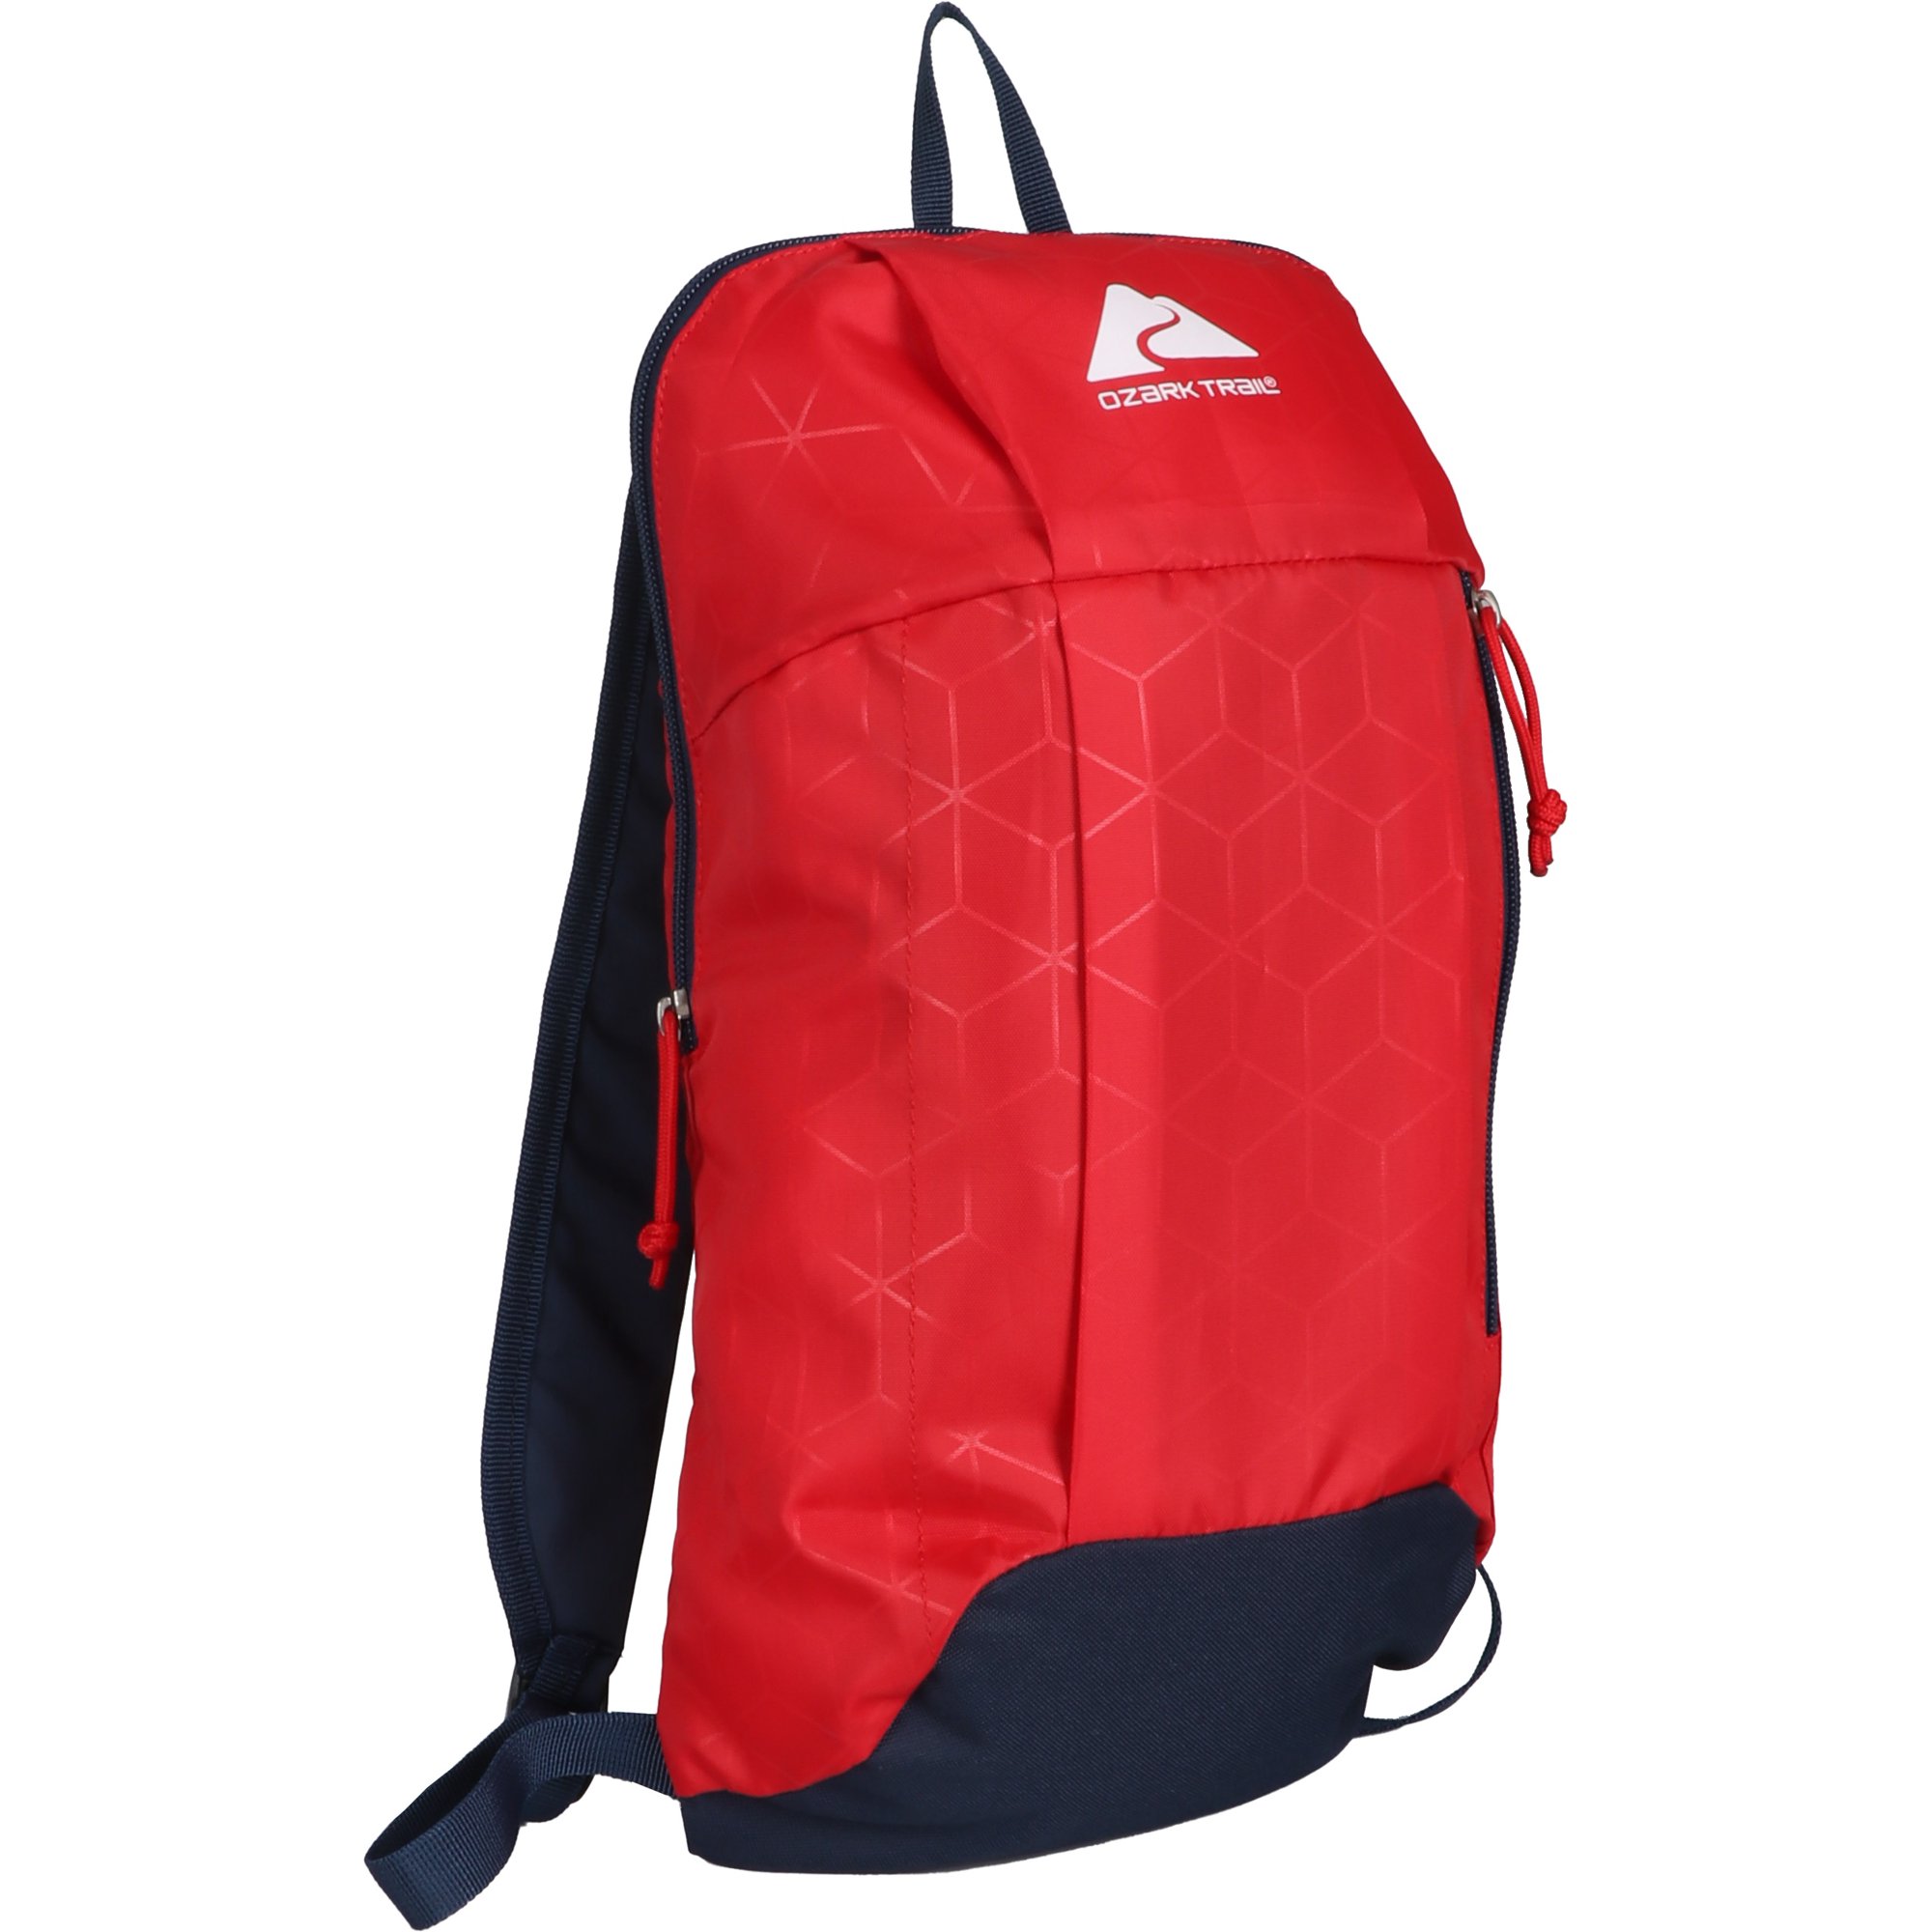 10L Ozark Trail Adult Backpacking Daypack (Red) $5.90 + Free Shipping w/ Walmart+ or $35+